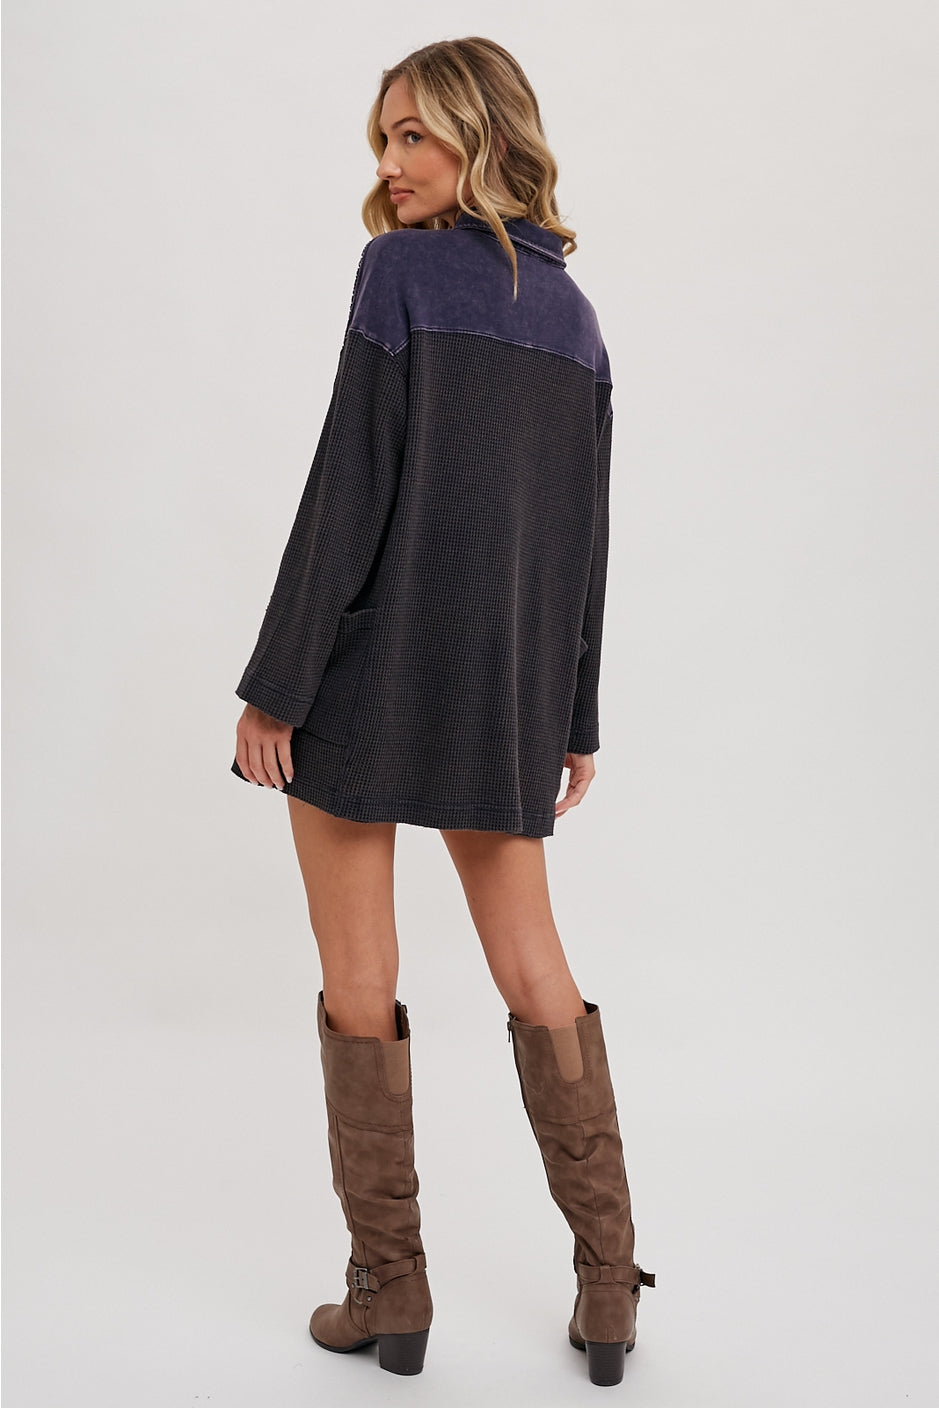 The Thermal Henley Tunic with POCKETS!! :)